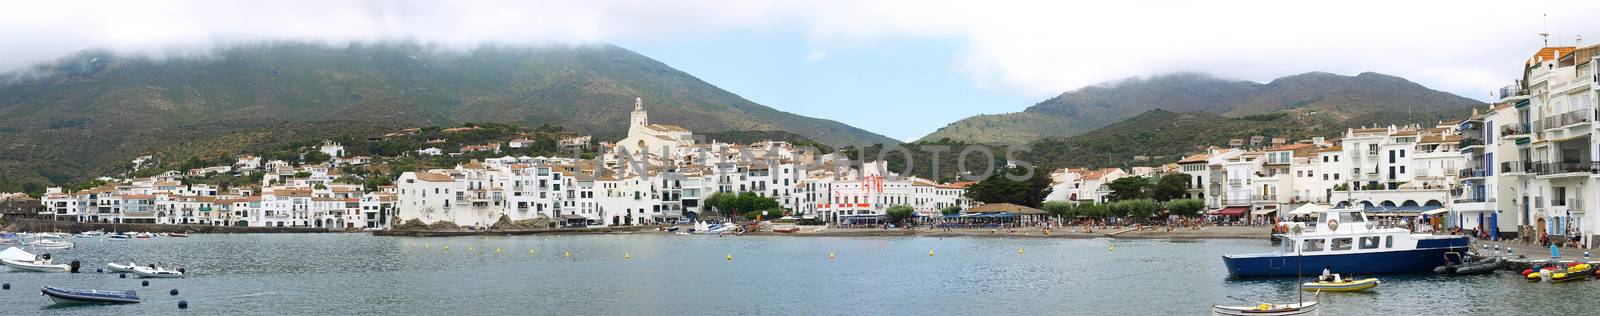 Cadaques view - panorama by Venakr